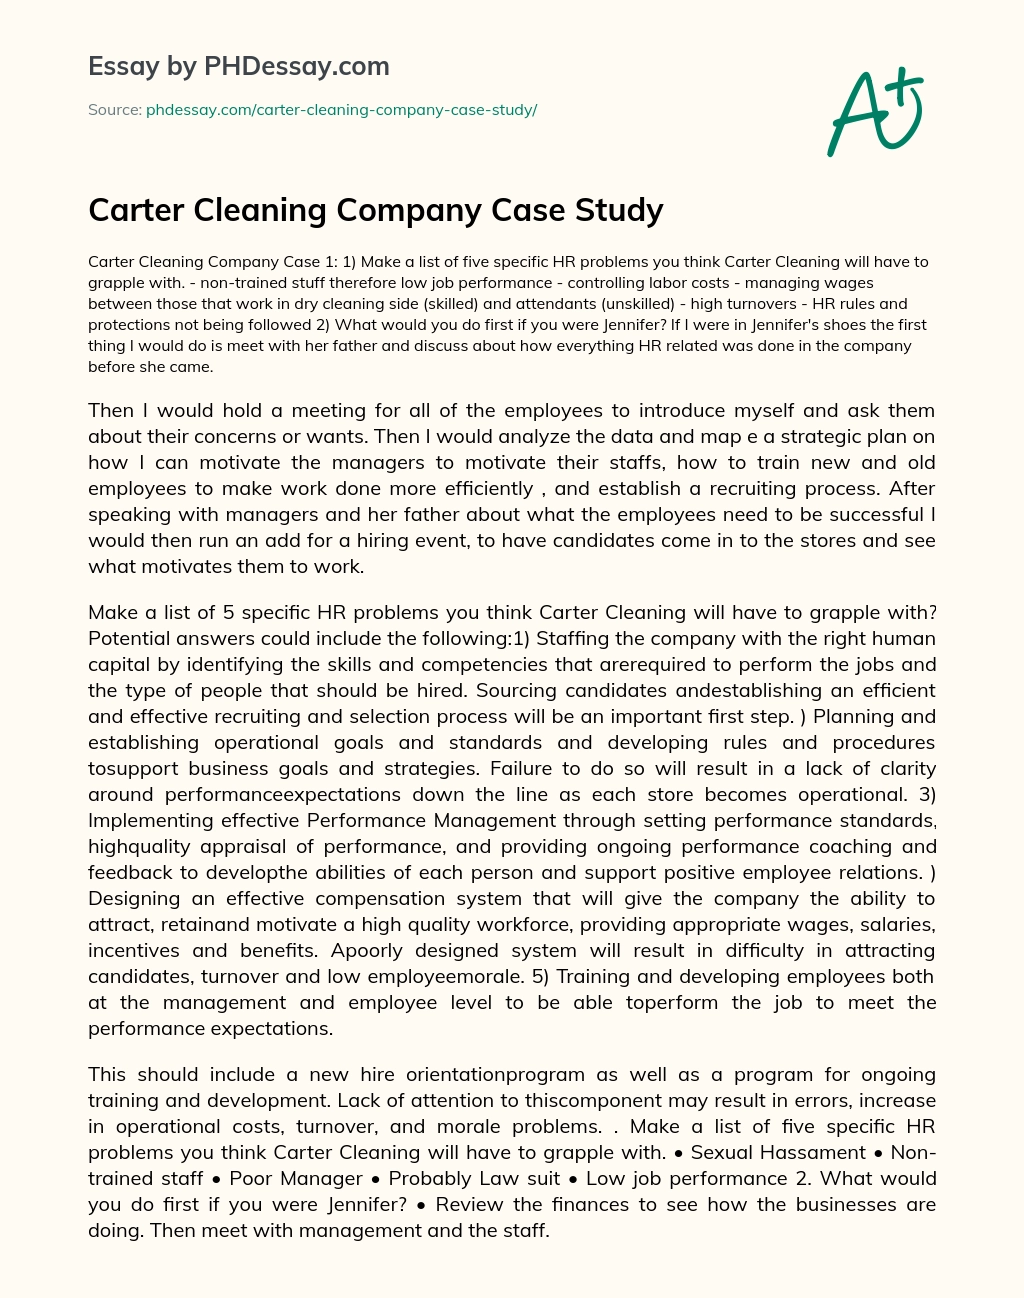 Carter Cleaning Company Case Study essay